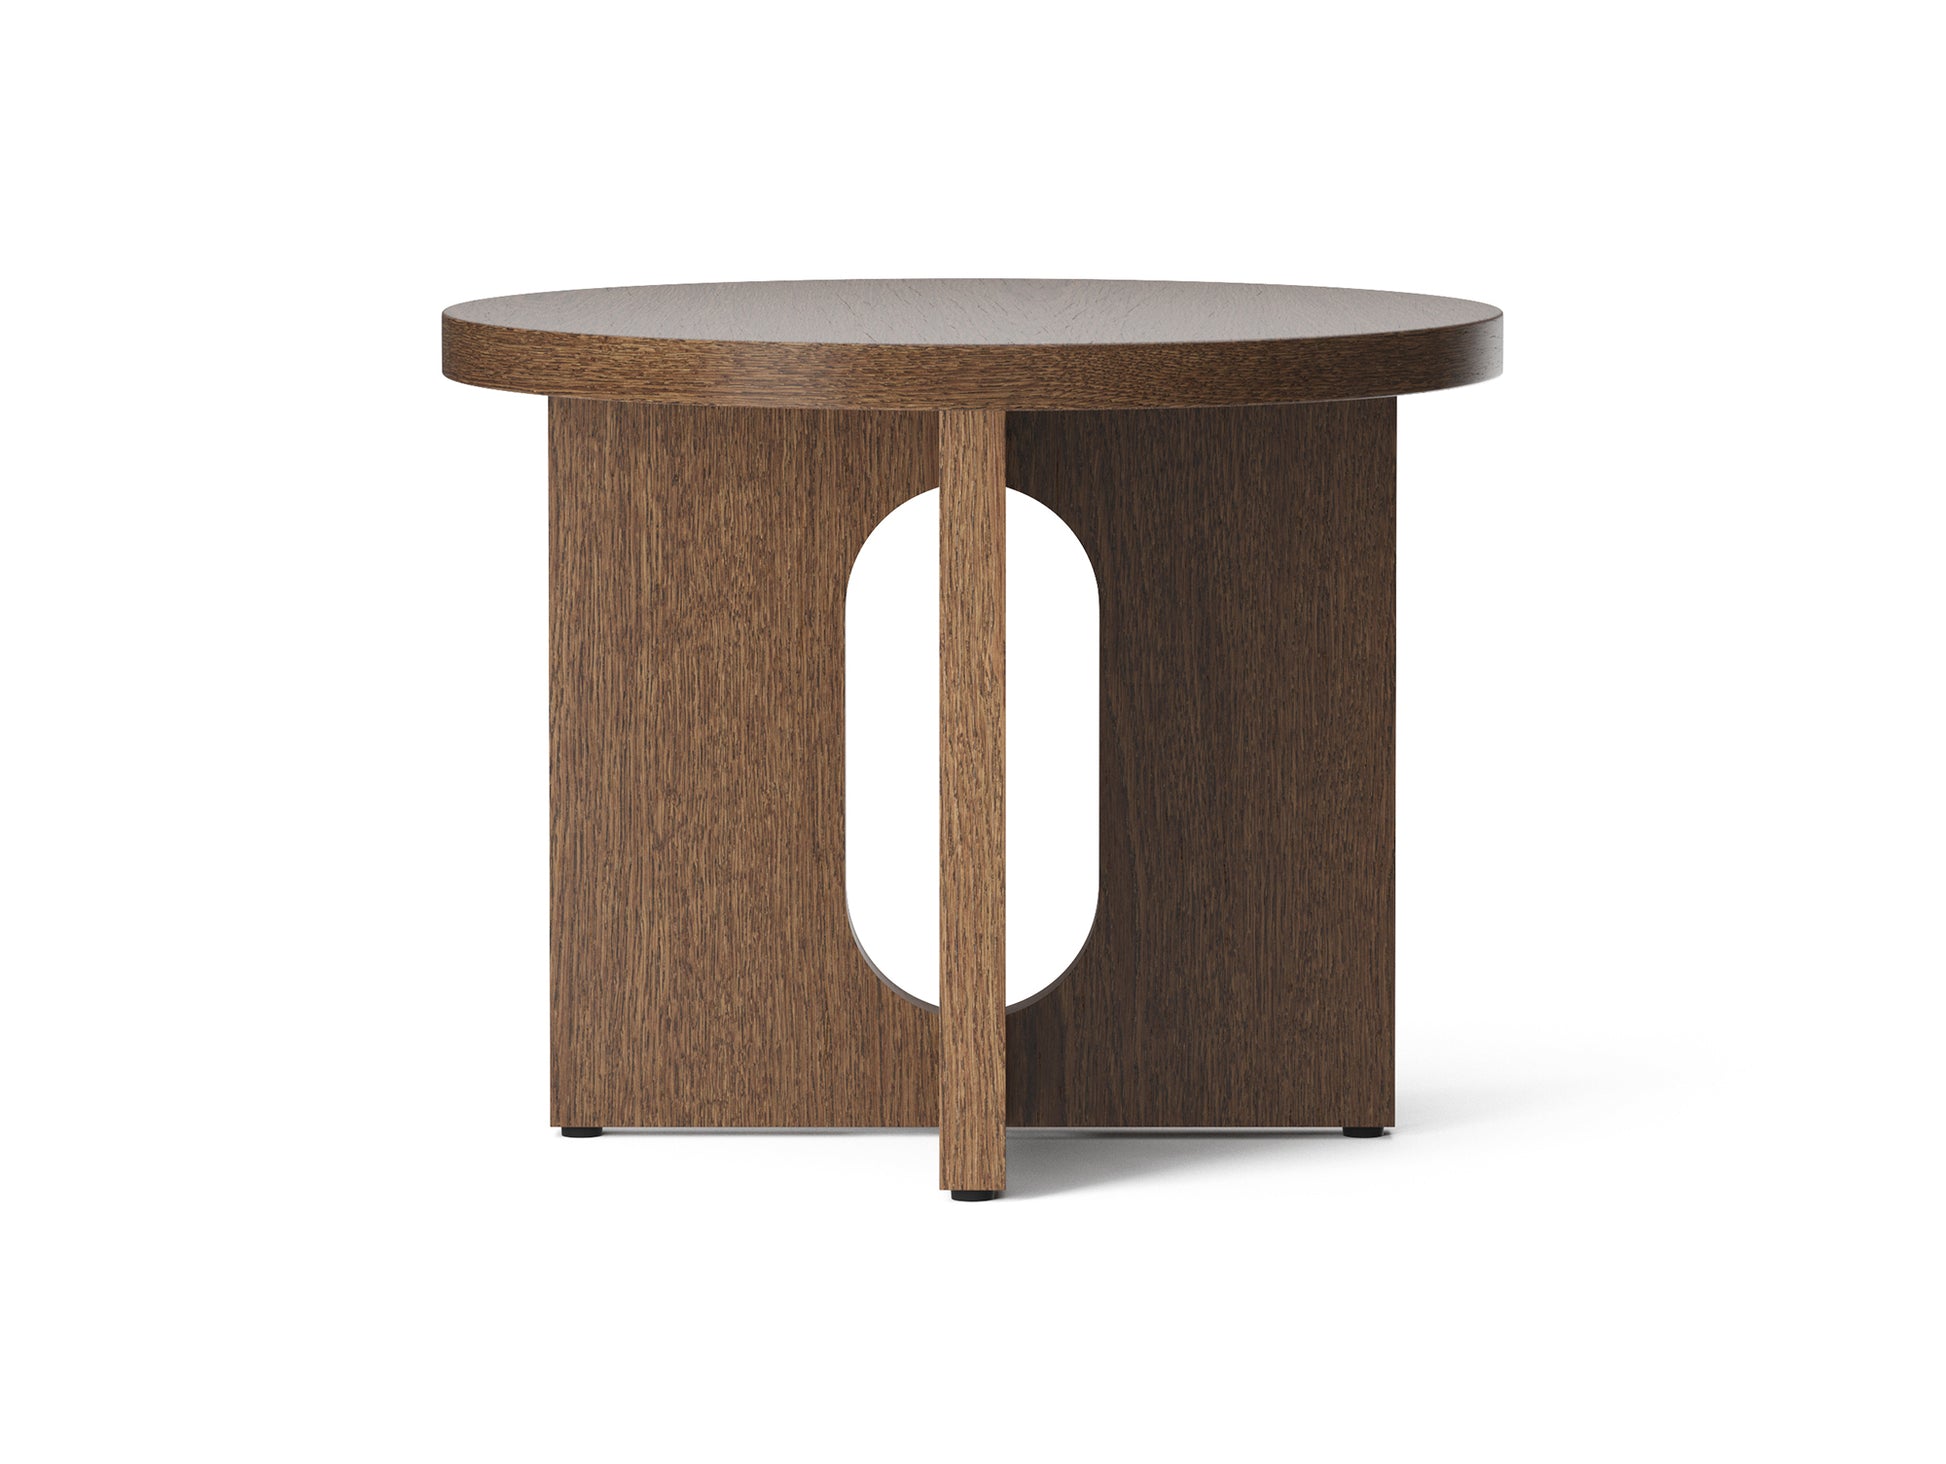 Androgyne Side Table, Ø50 - Dark Stained Oak Veneer Top / Dark Stained Oak Veneer Base